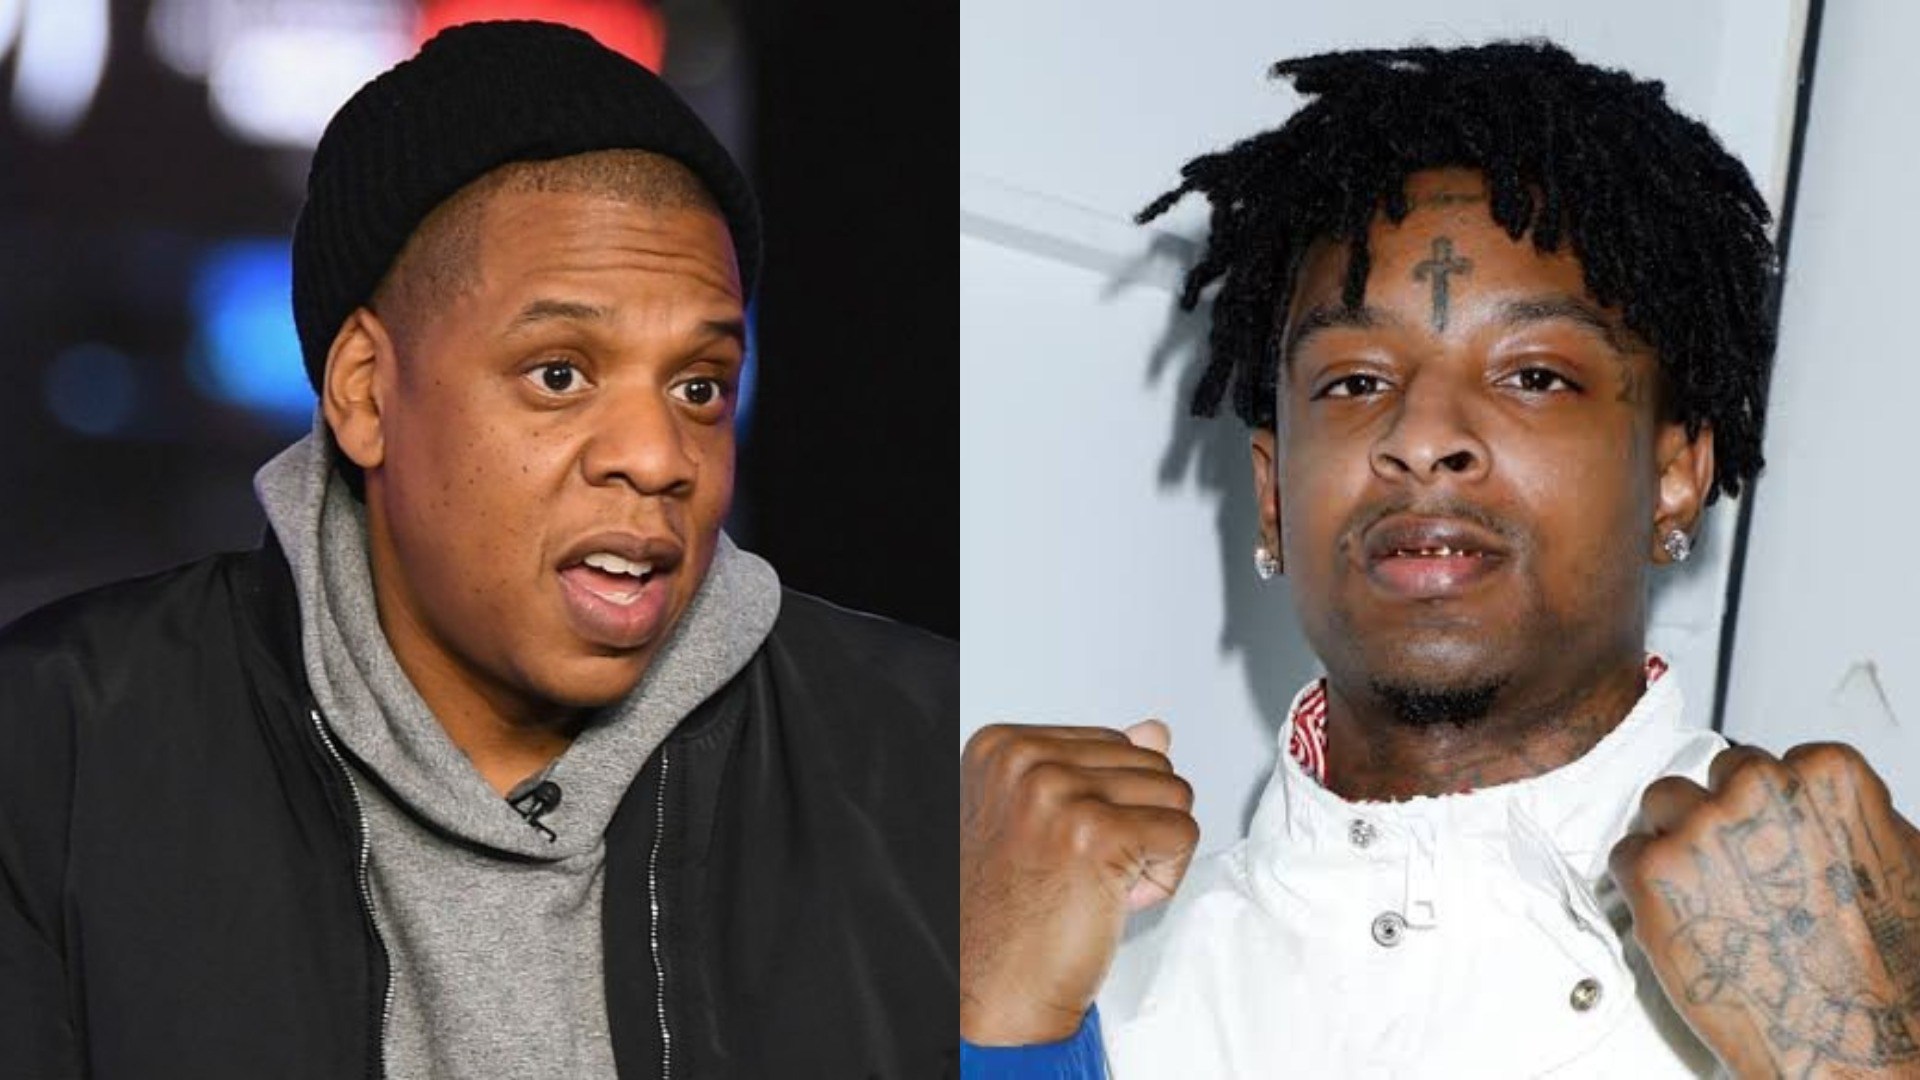 Jay Z Comes To The Defense Of Rapper 21 Savage !!!